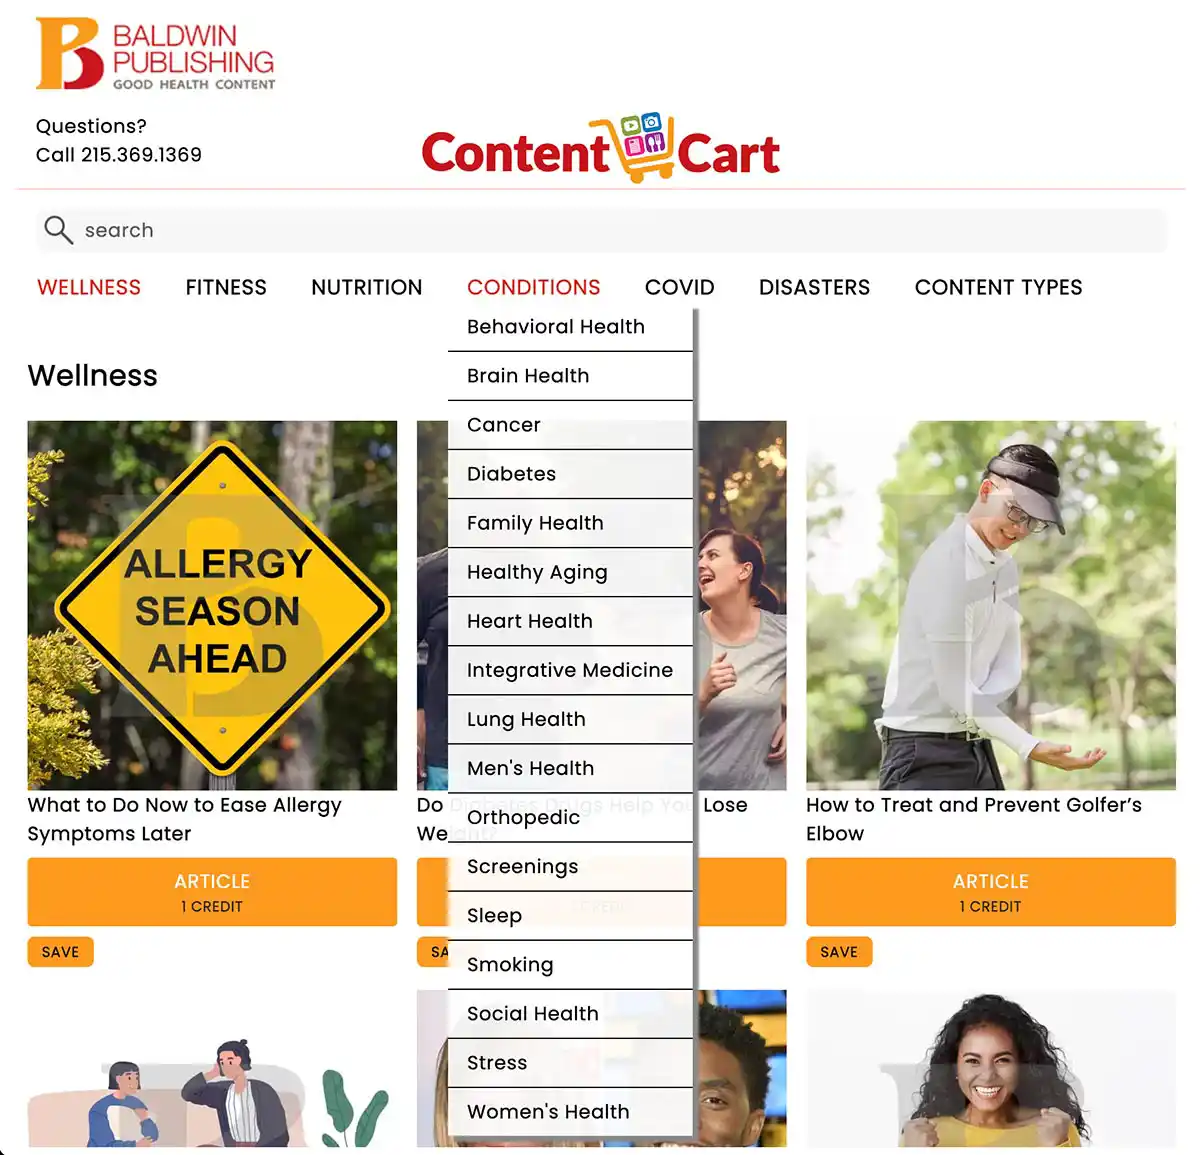 Content Cart Display in Action